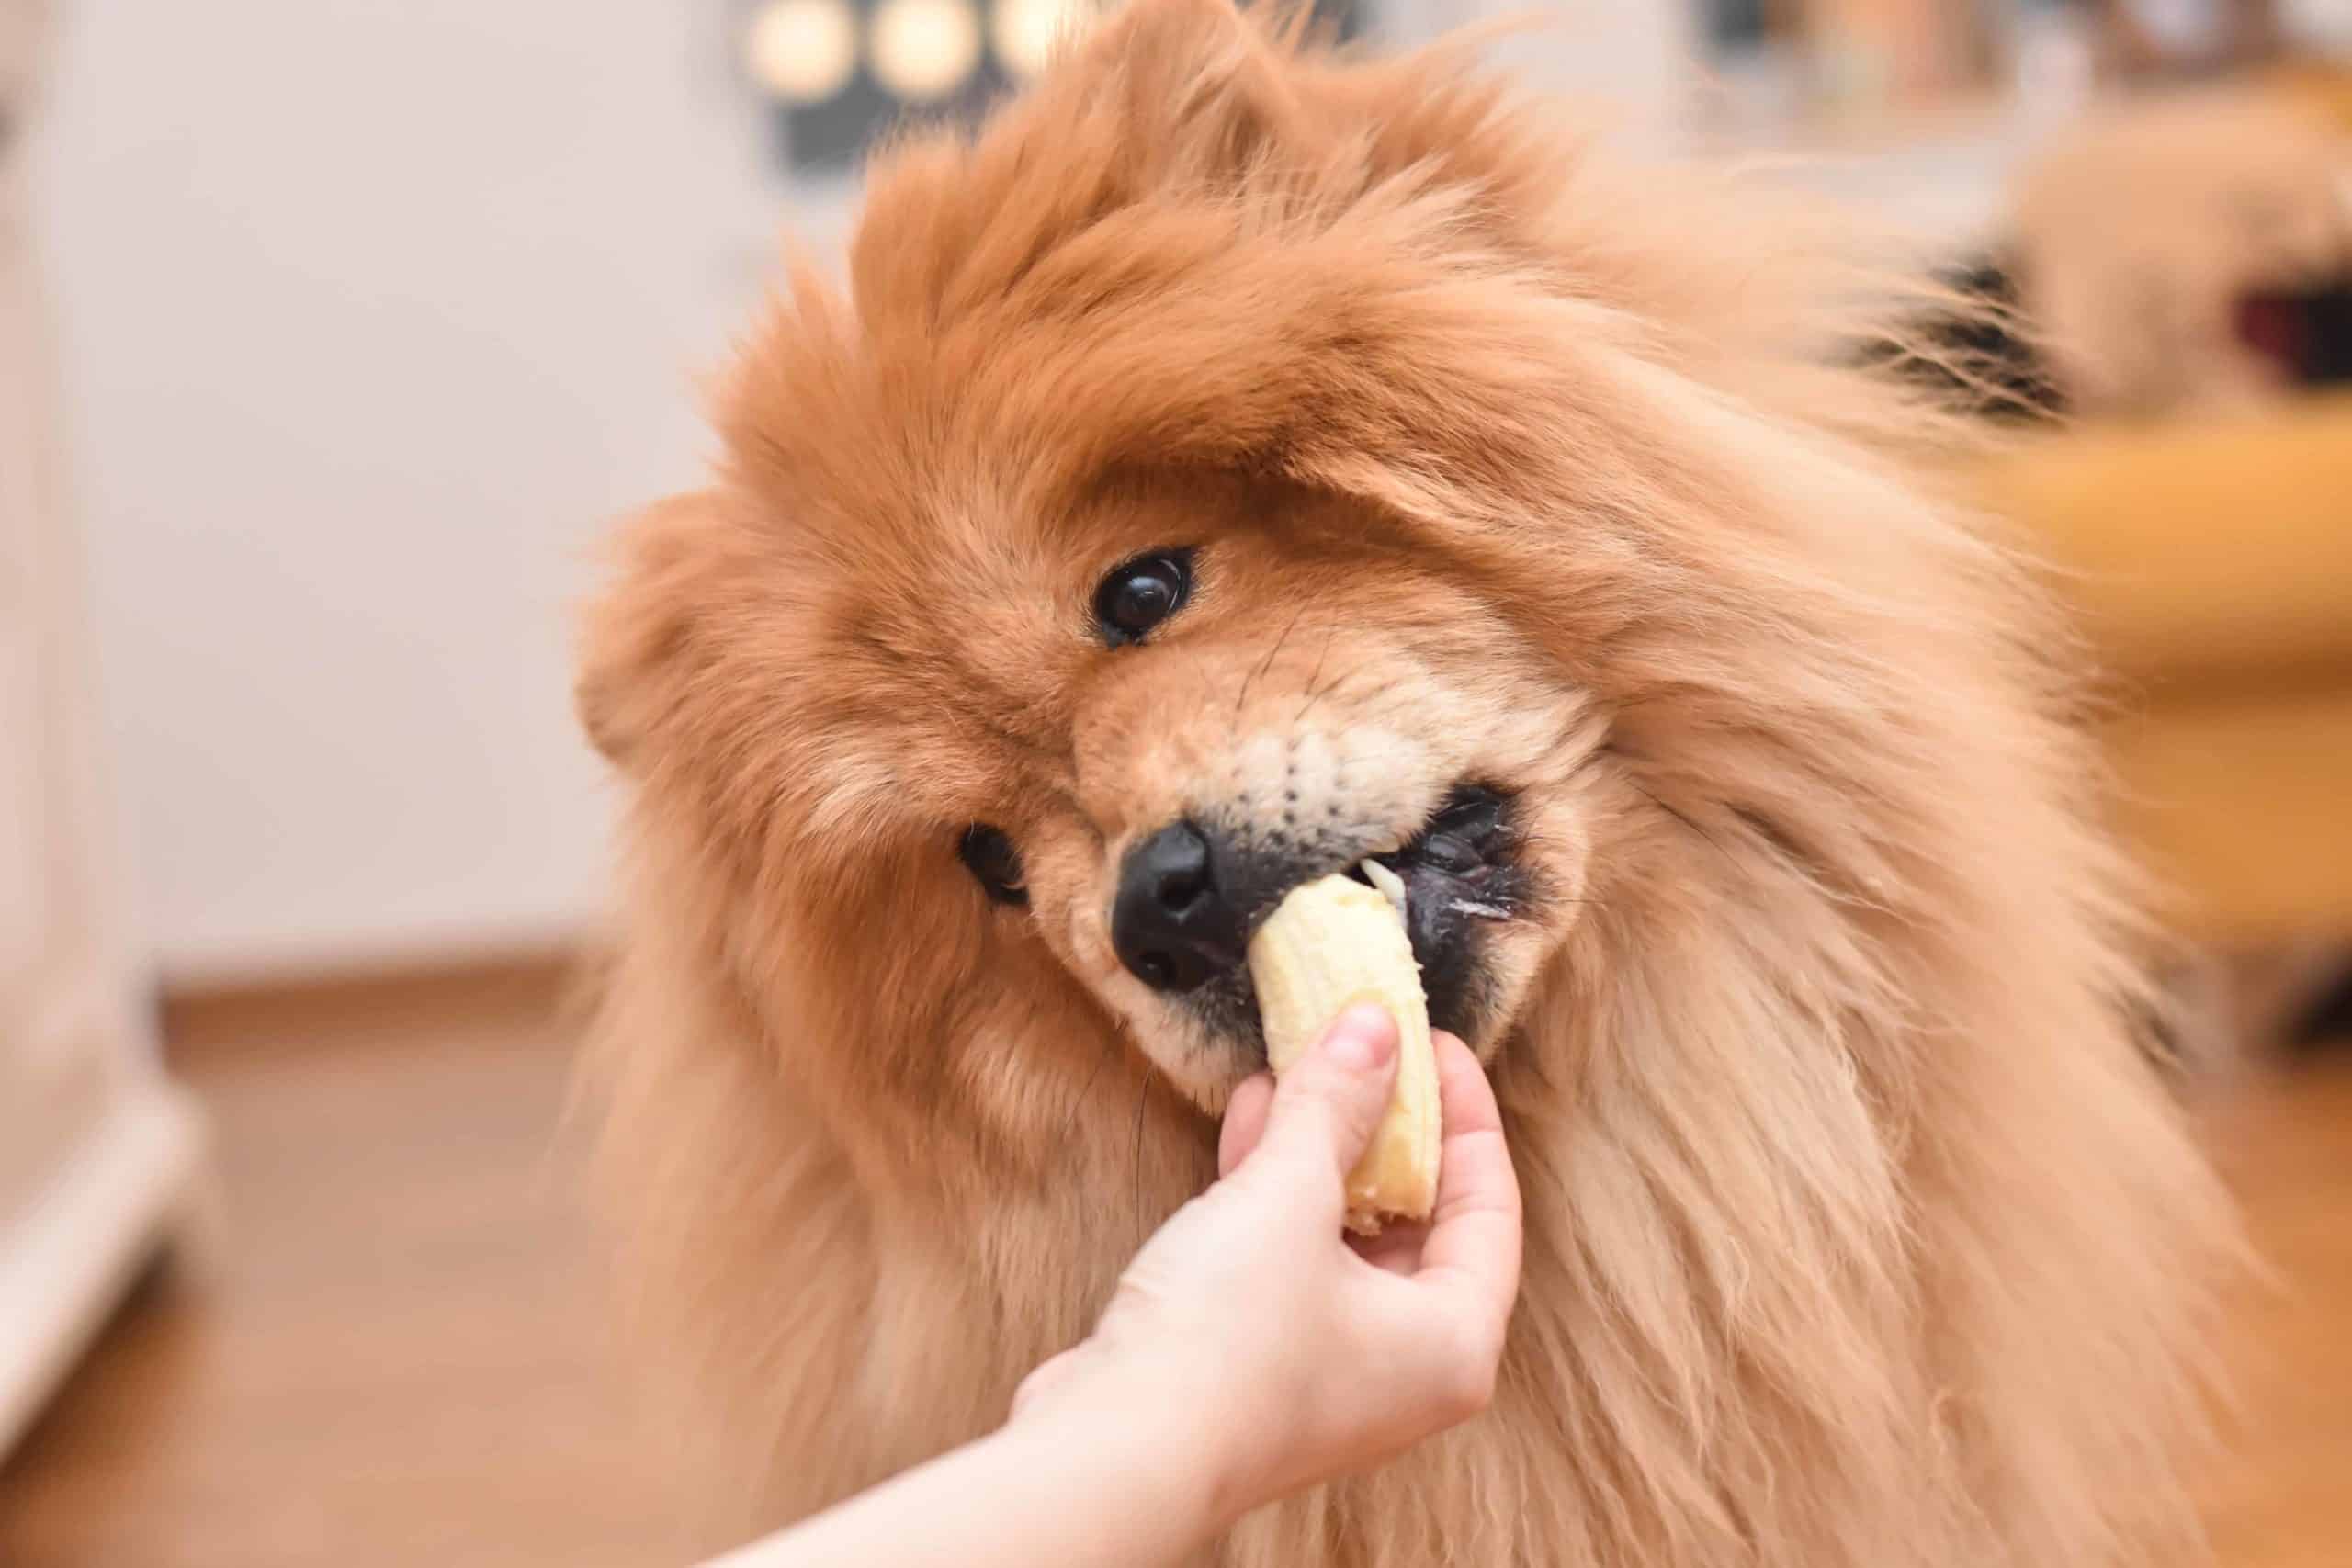 Owner feeds Chow-Chow banana. Bananas make a healthy snack for puppies because they have a natural sweetness, which is why many puppies love munching on them.